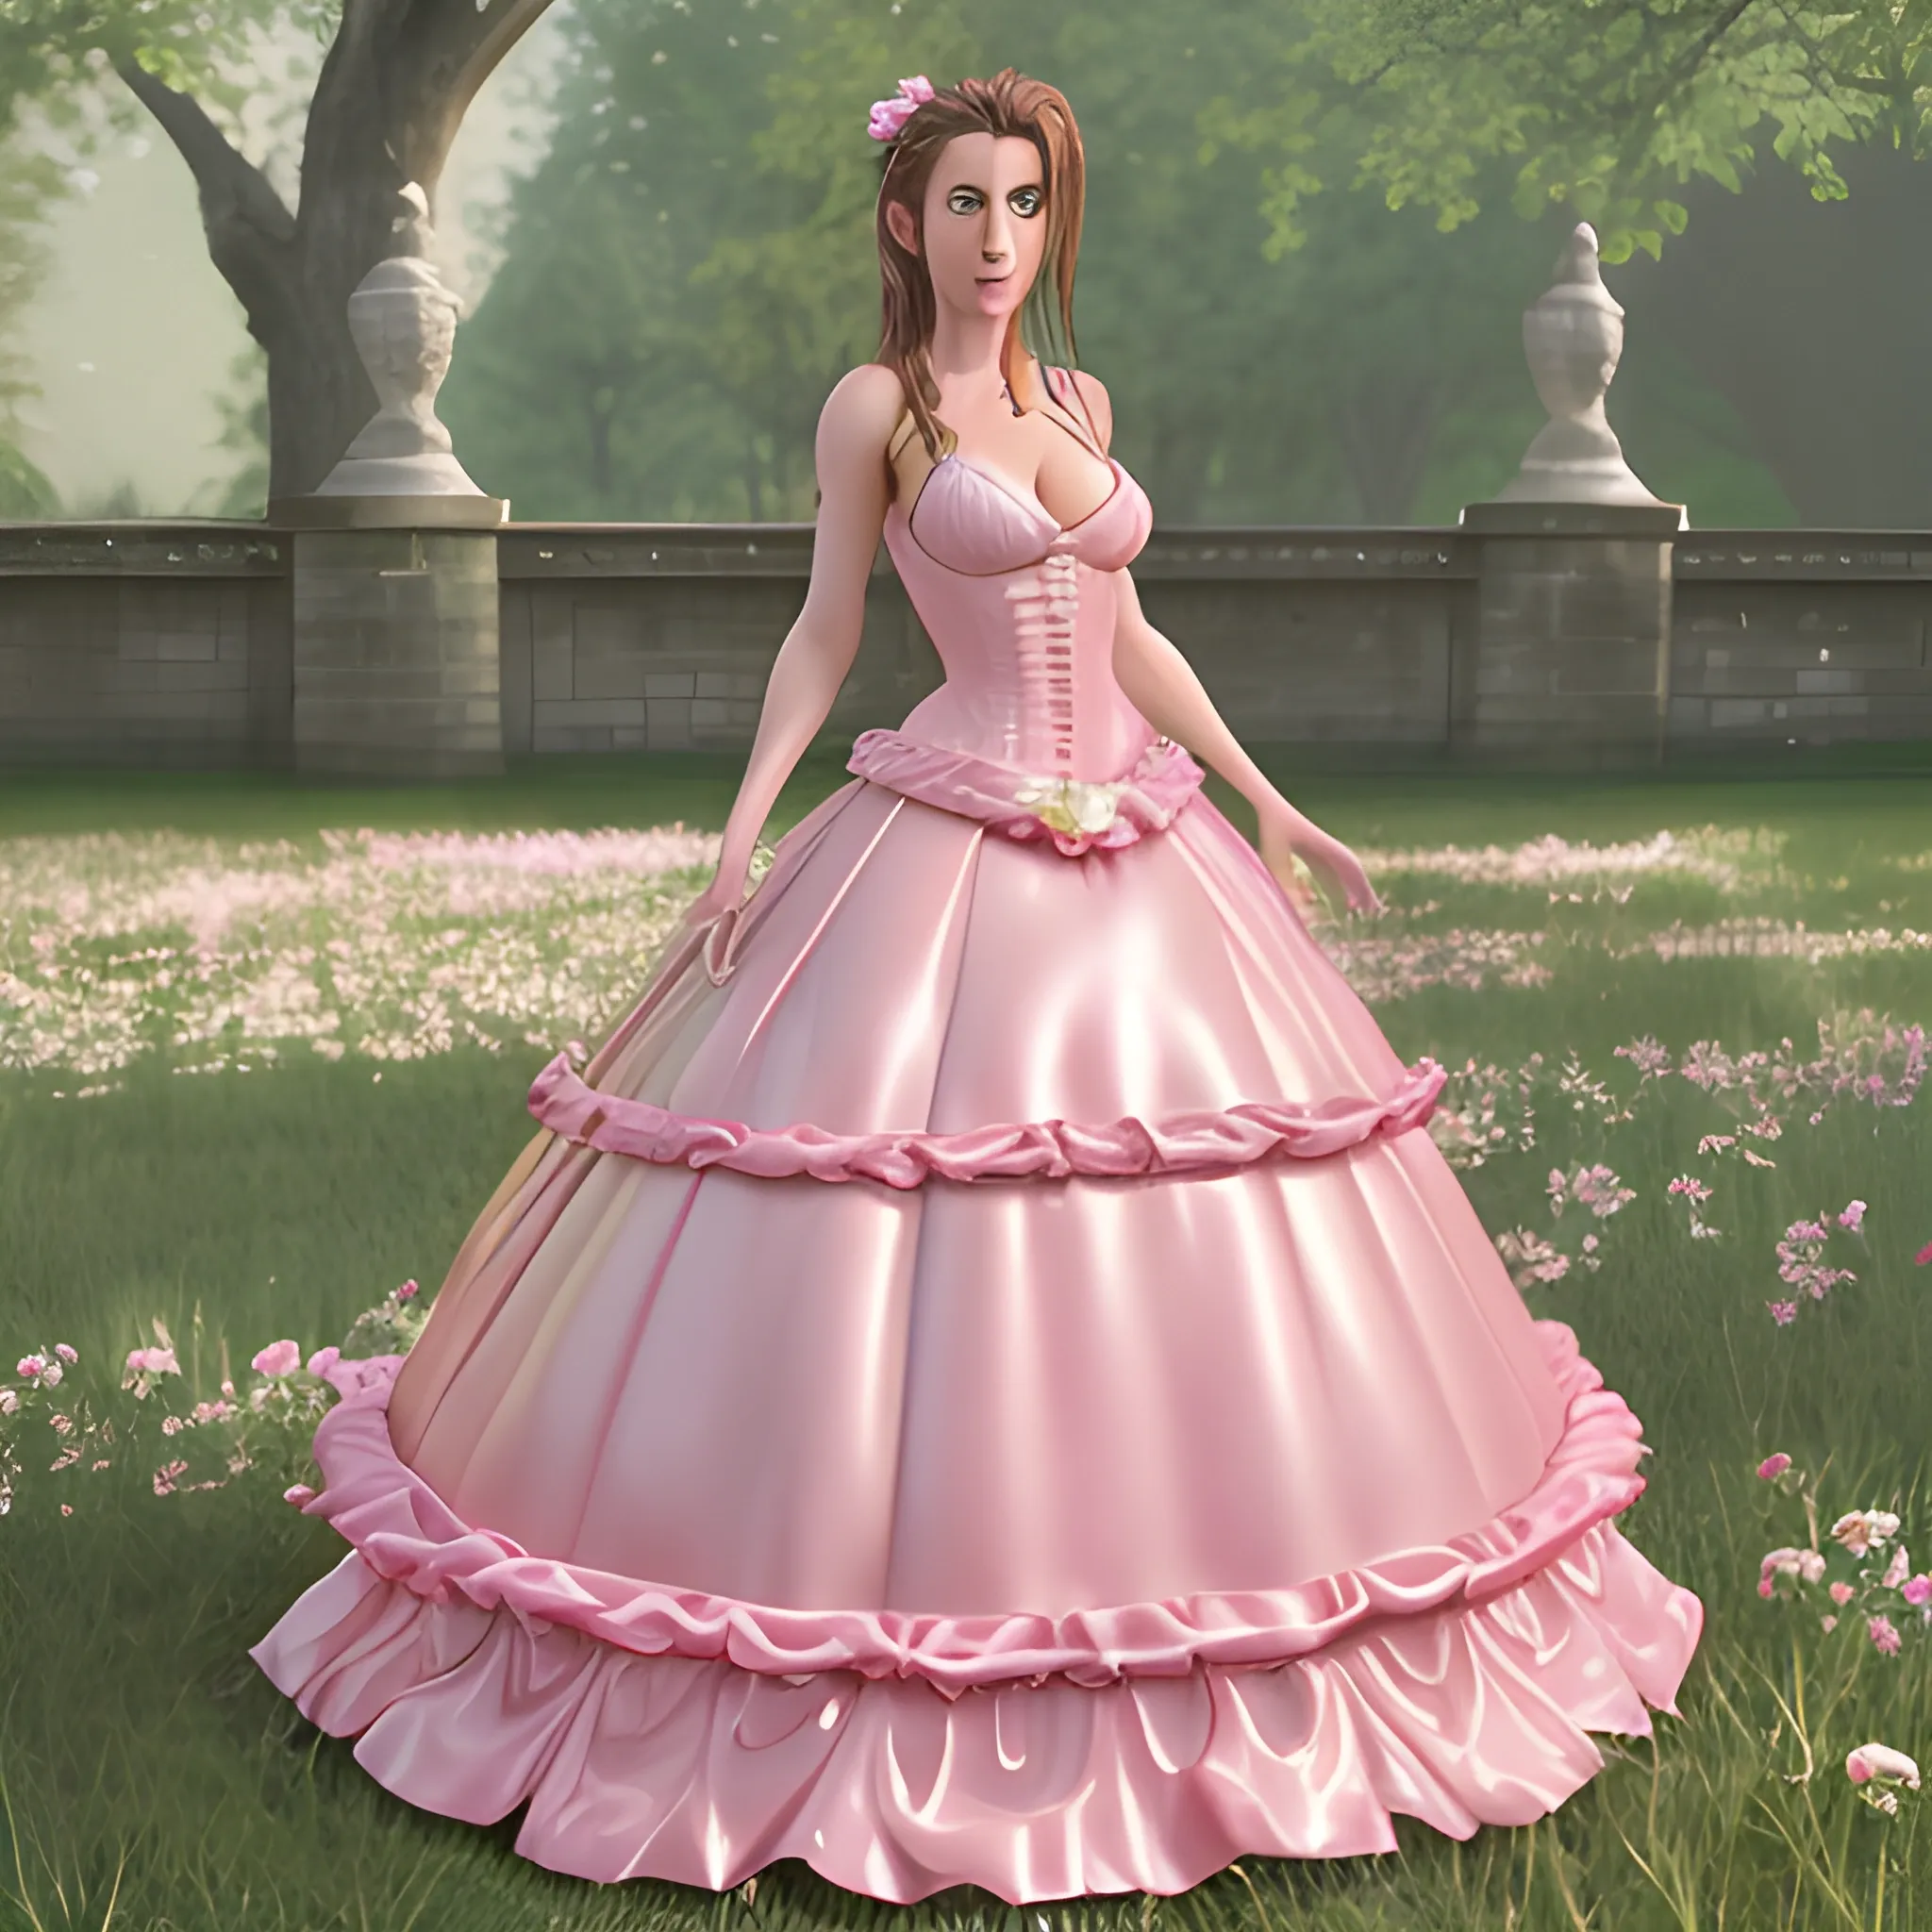 Photorealistic image of Aerith Gainsborough, she is wearing romantic pink latex wedding dress. Breast naked and visible, high details, full body visible